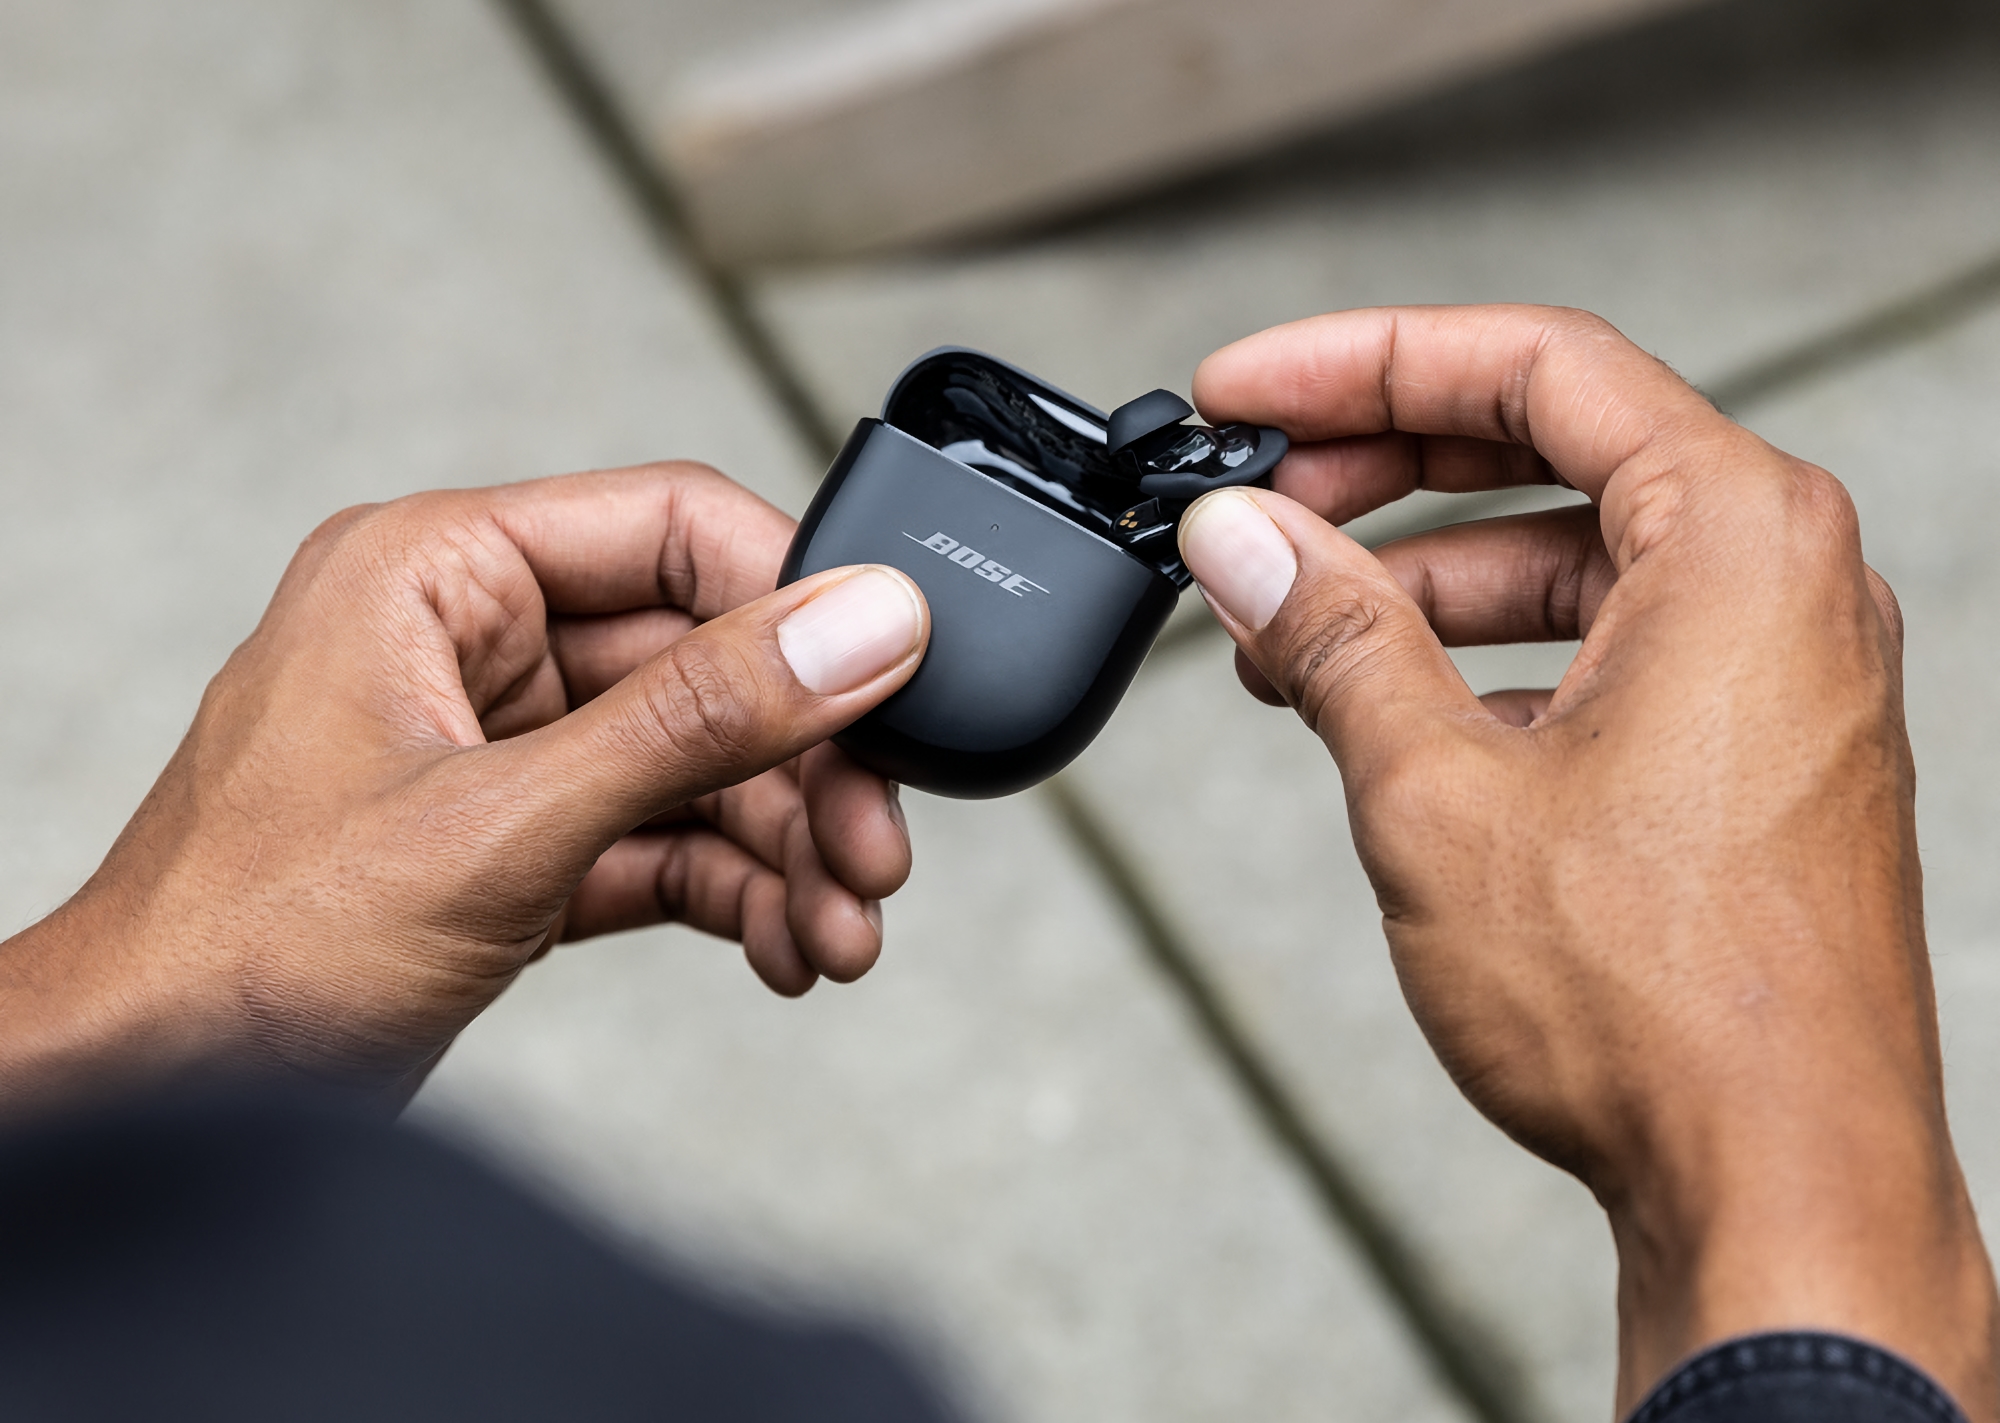 AirPods Pro competitor: Bose introduced QuietComfort Earbuds II with improved ANC, IPX4 protection and up to 24 hours of battery life for $299